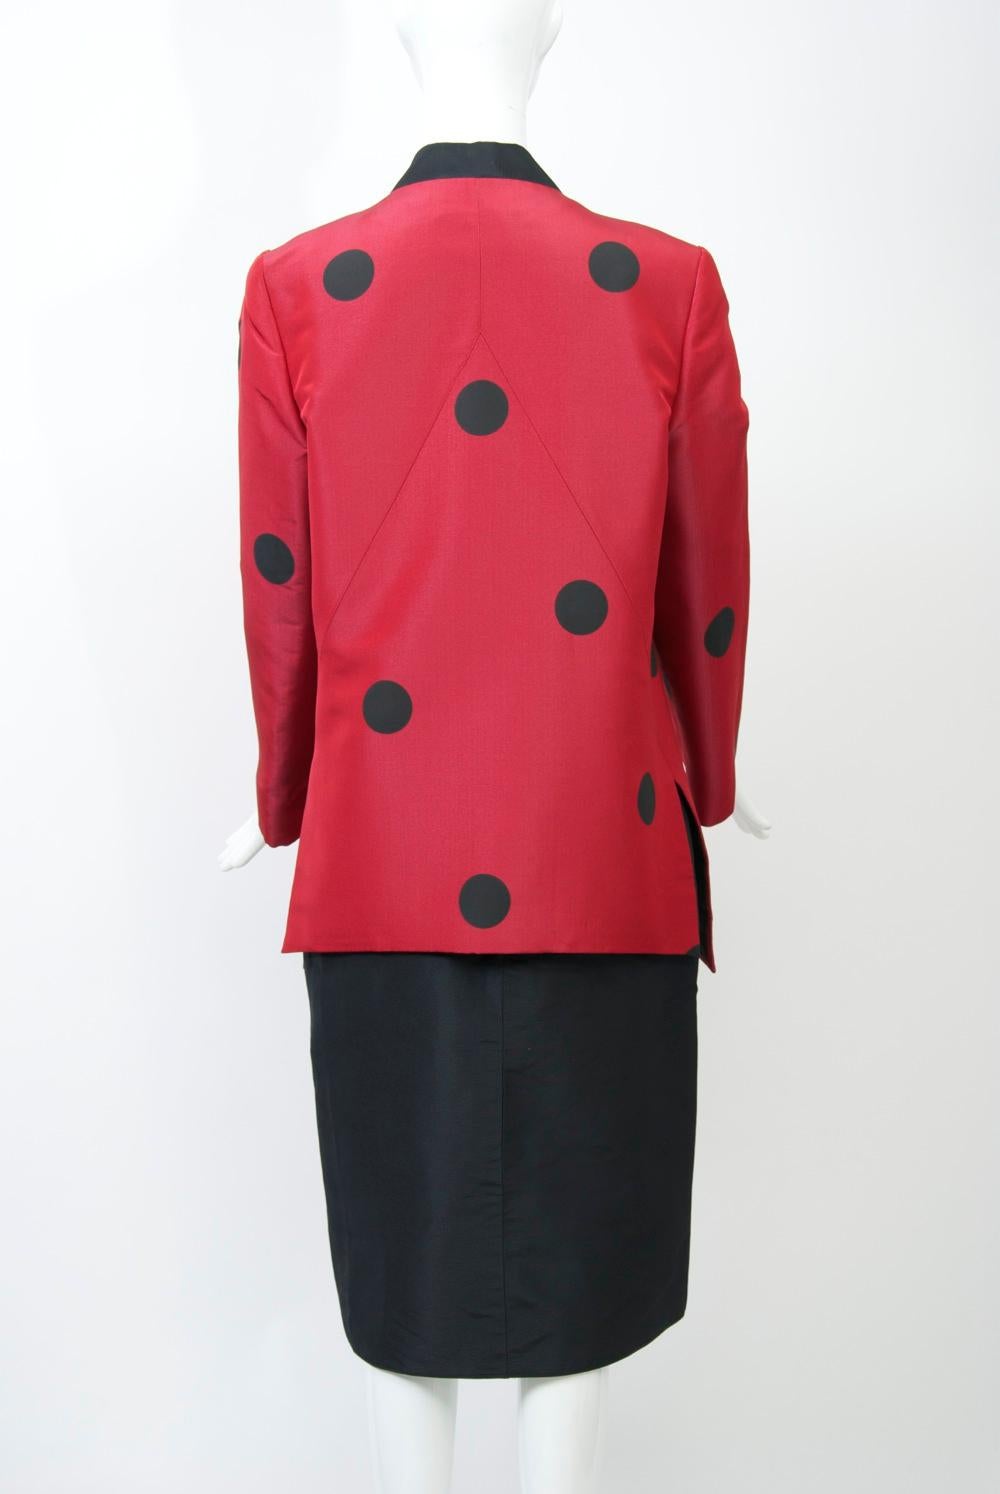 Geoffrey Beene Red and Black Silk Suit For Sale 1